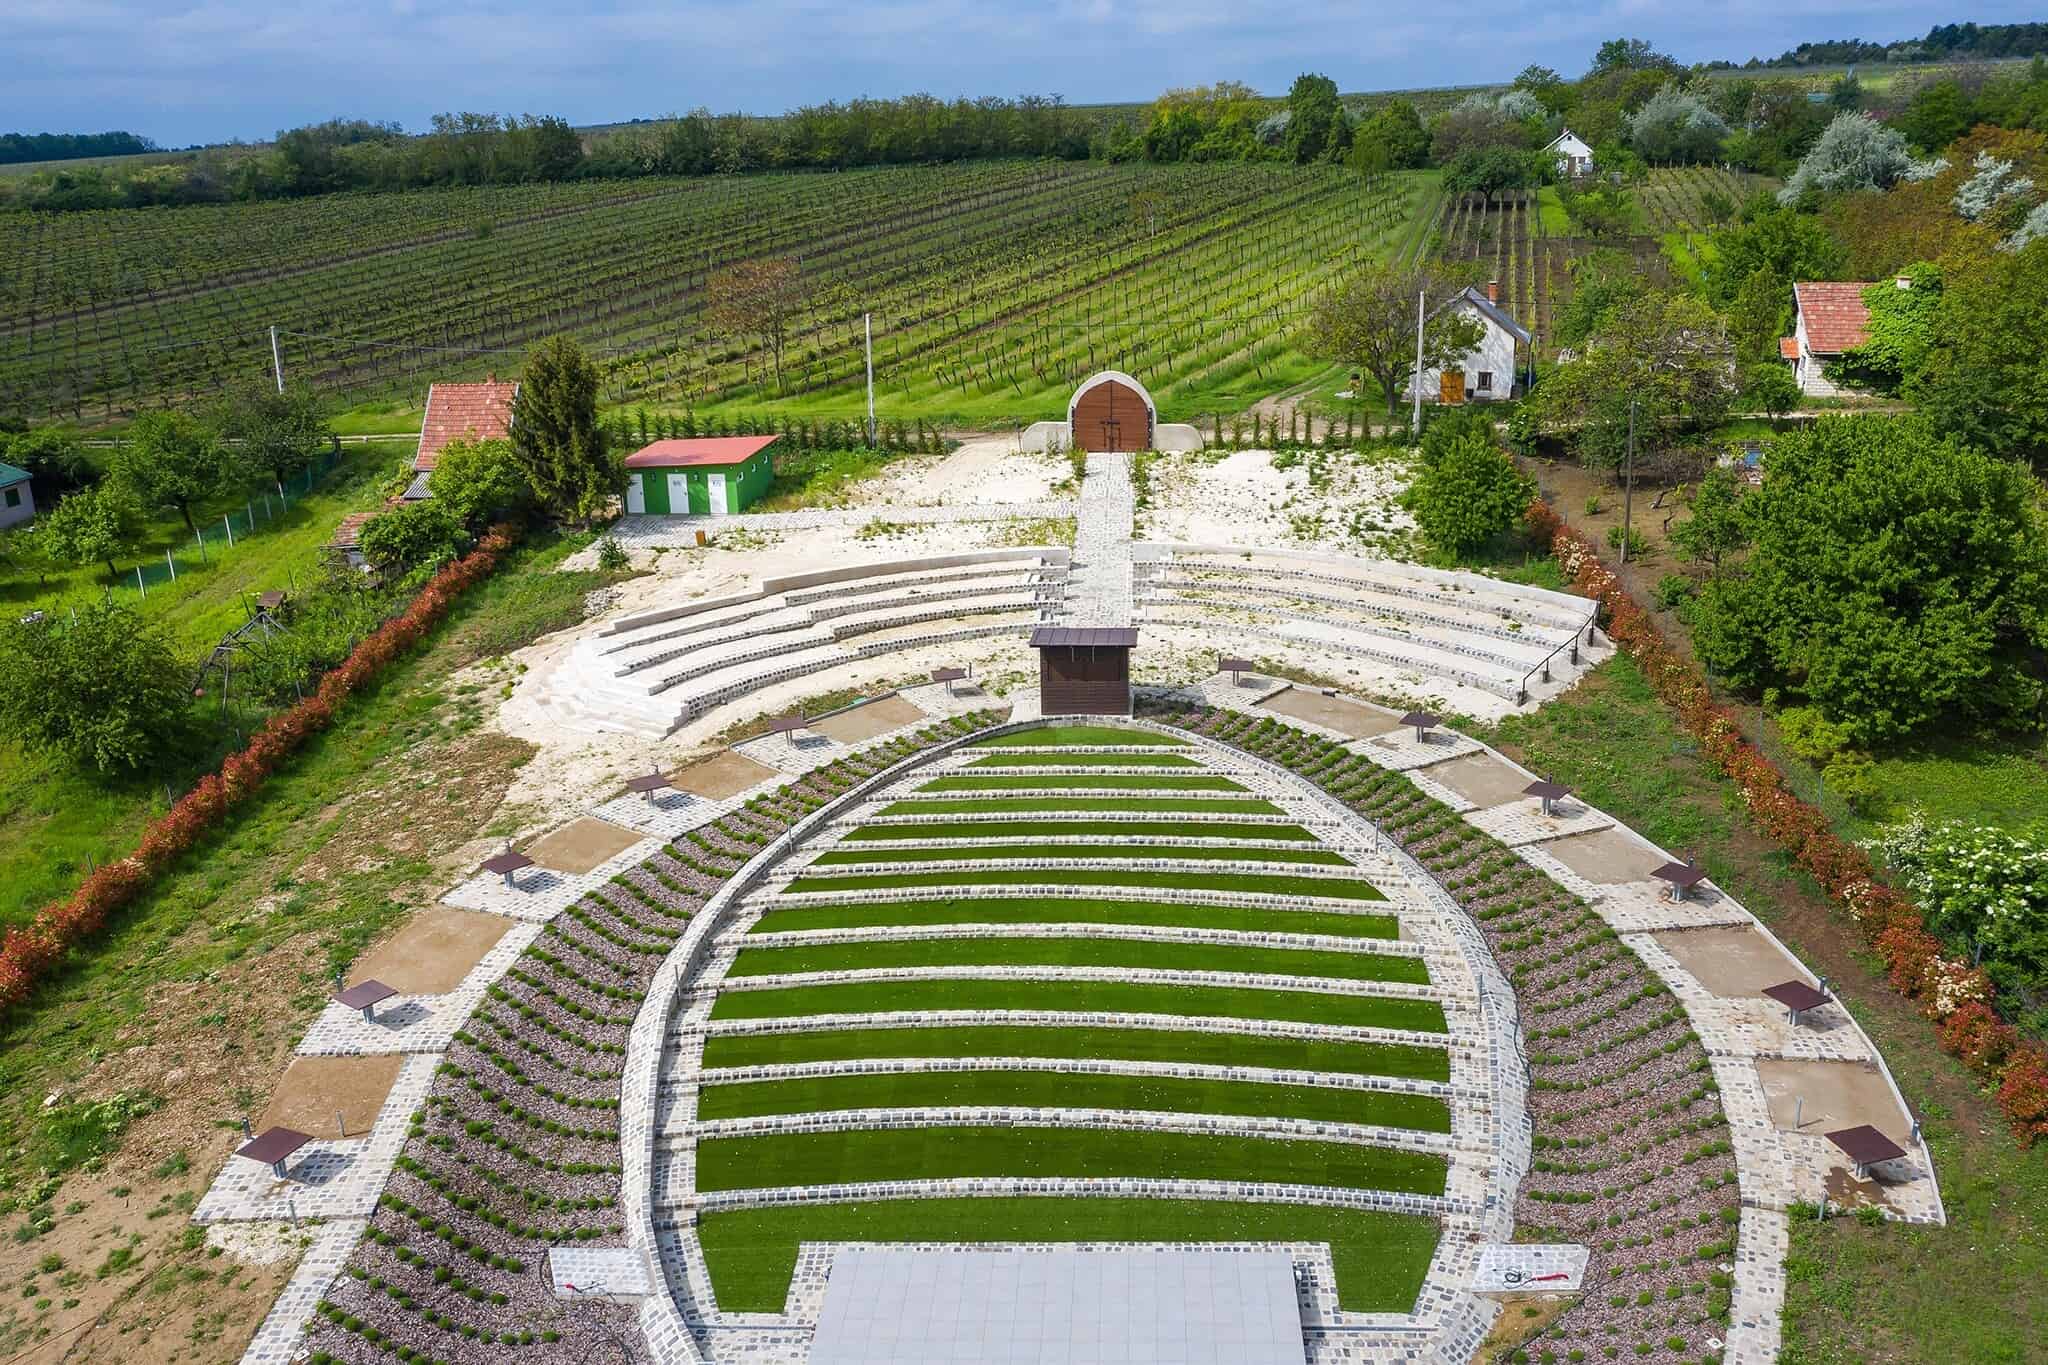 Haraszthy Winery, Etyek The show must go on! Haraszthy Winery boasts an Amphiteater within the estate with frequent performances. Concerts are held in the evening, but in the morning the best programme is on: harvest in the surrounding vineyards!